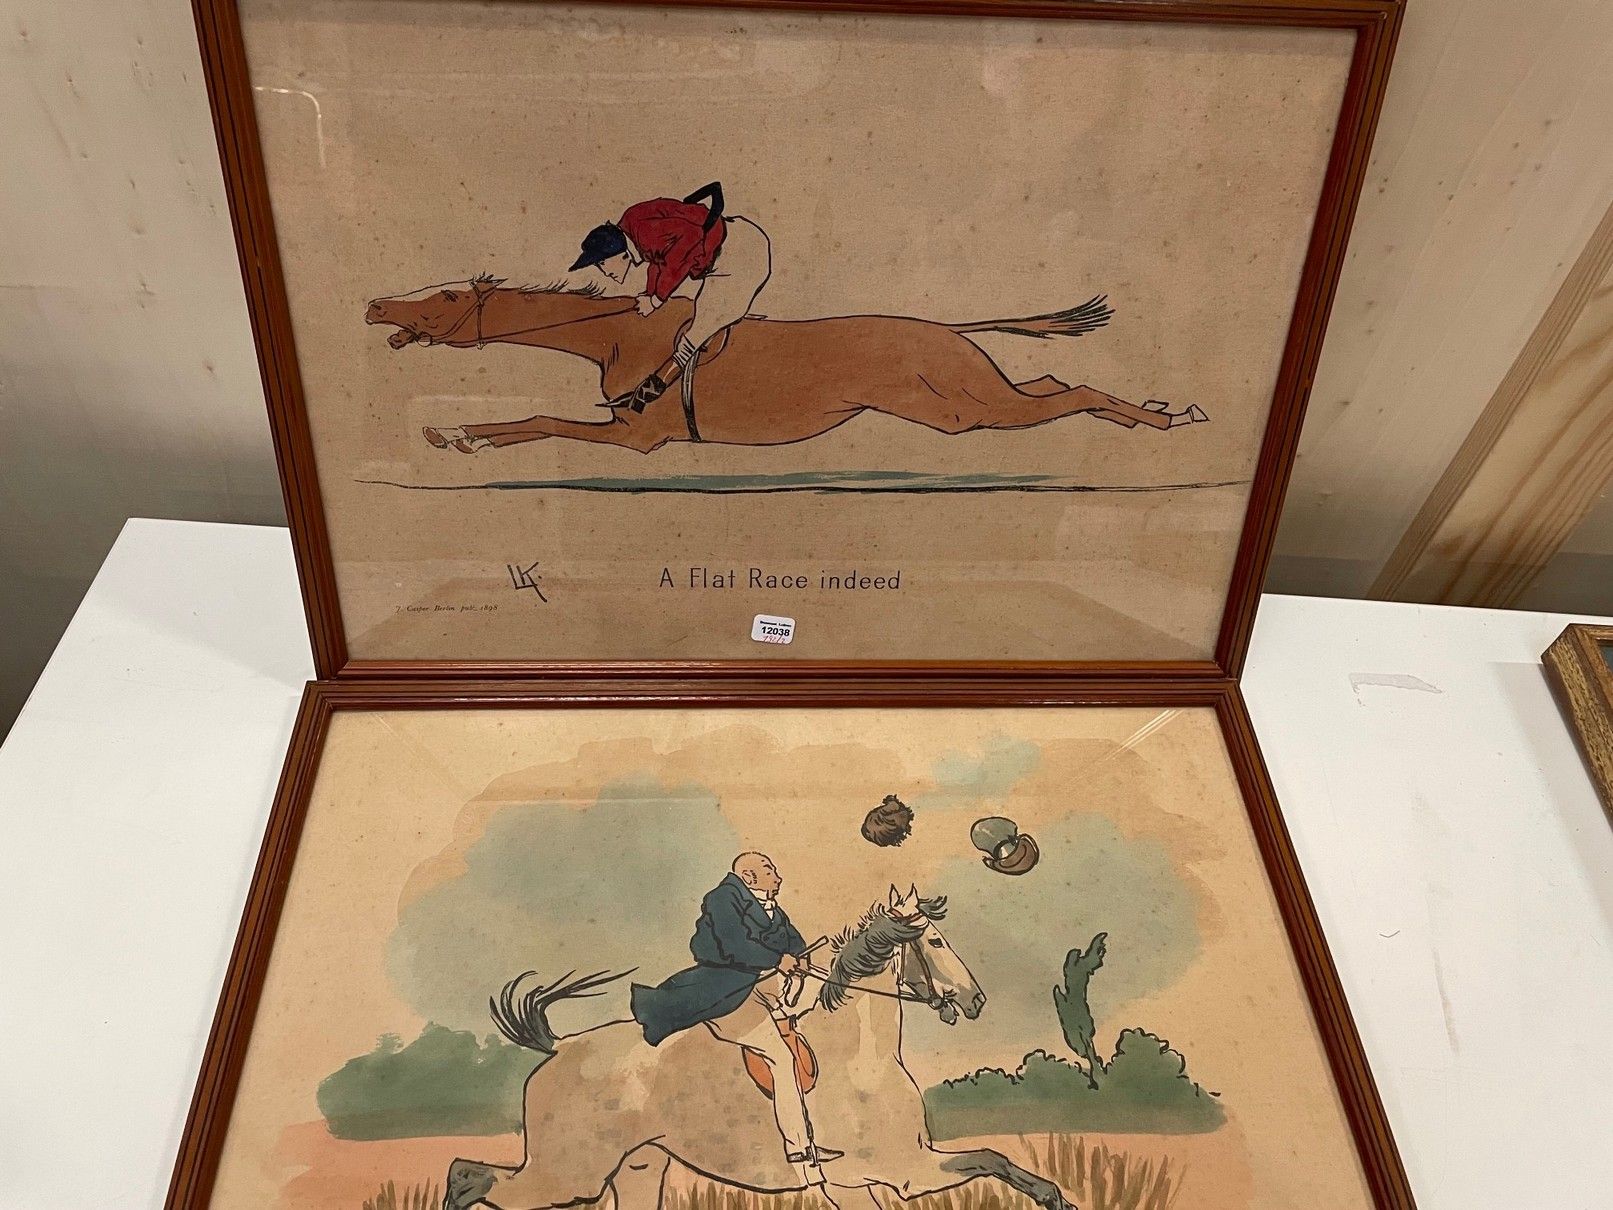 Null Two English humorous equestrian engravings in color : "A flat Race indeed".